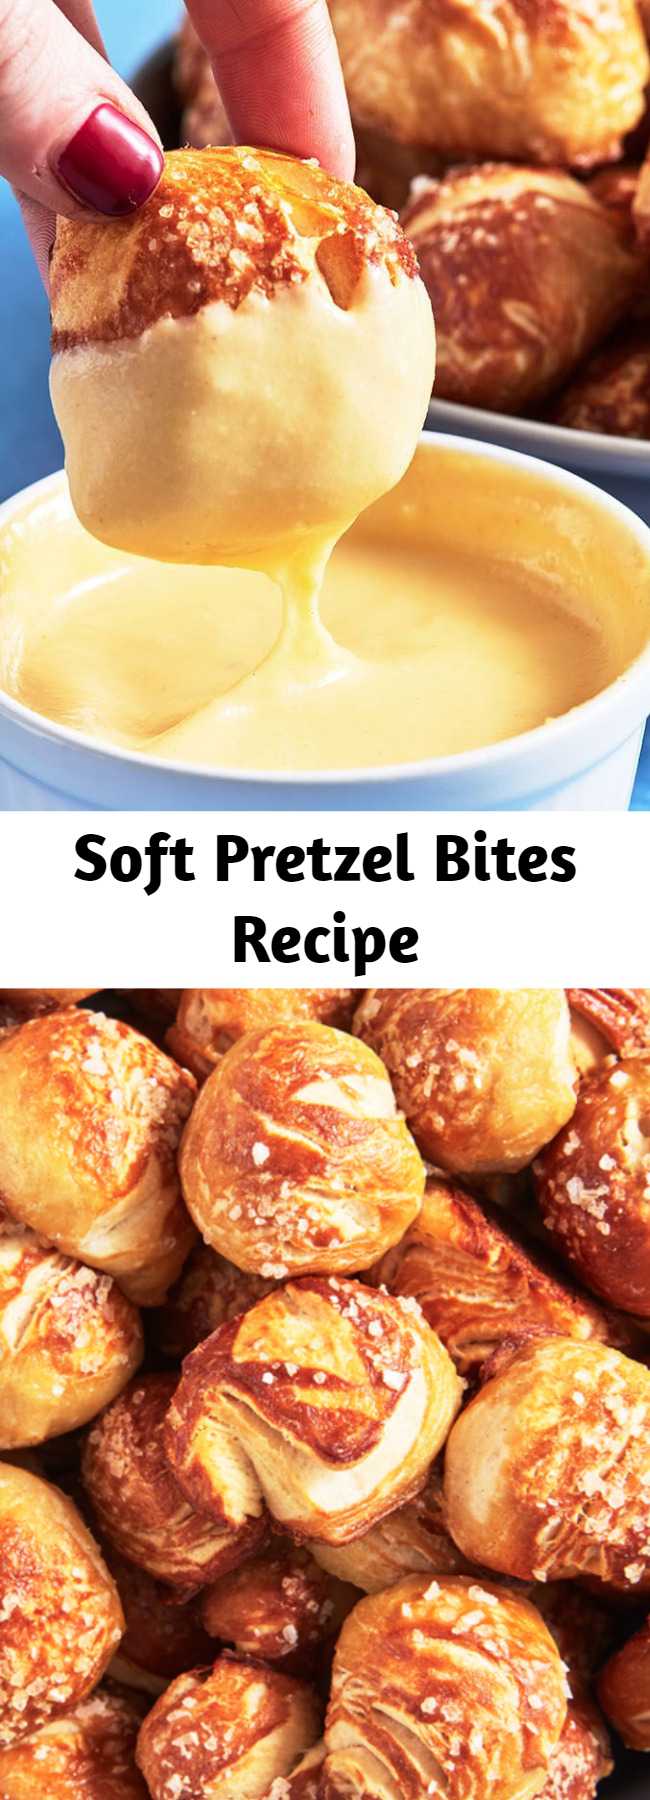 Soft Pretzel Bites Recipe - Using canned biscuits to make pretzel bites is the best hack ever. The pretzels won't look gorgeous as they come out of the boiling water, but don't worry—they will brown and crisp up and be oh-so-gorgeous when they come out of the oven! #easy #recipe #pretzels #bites #soft #softpretzel #auntieannes #bread